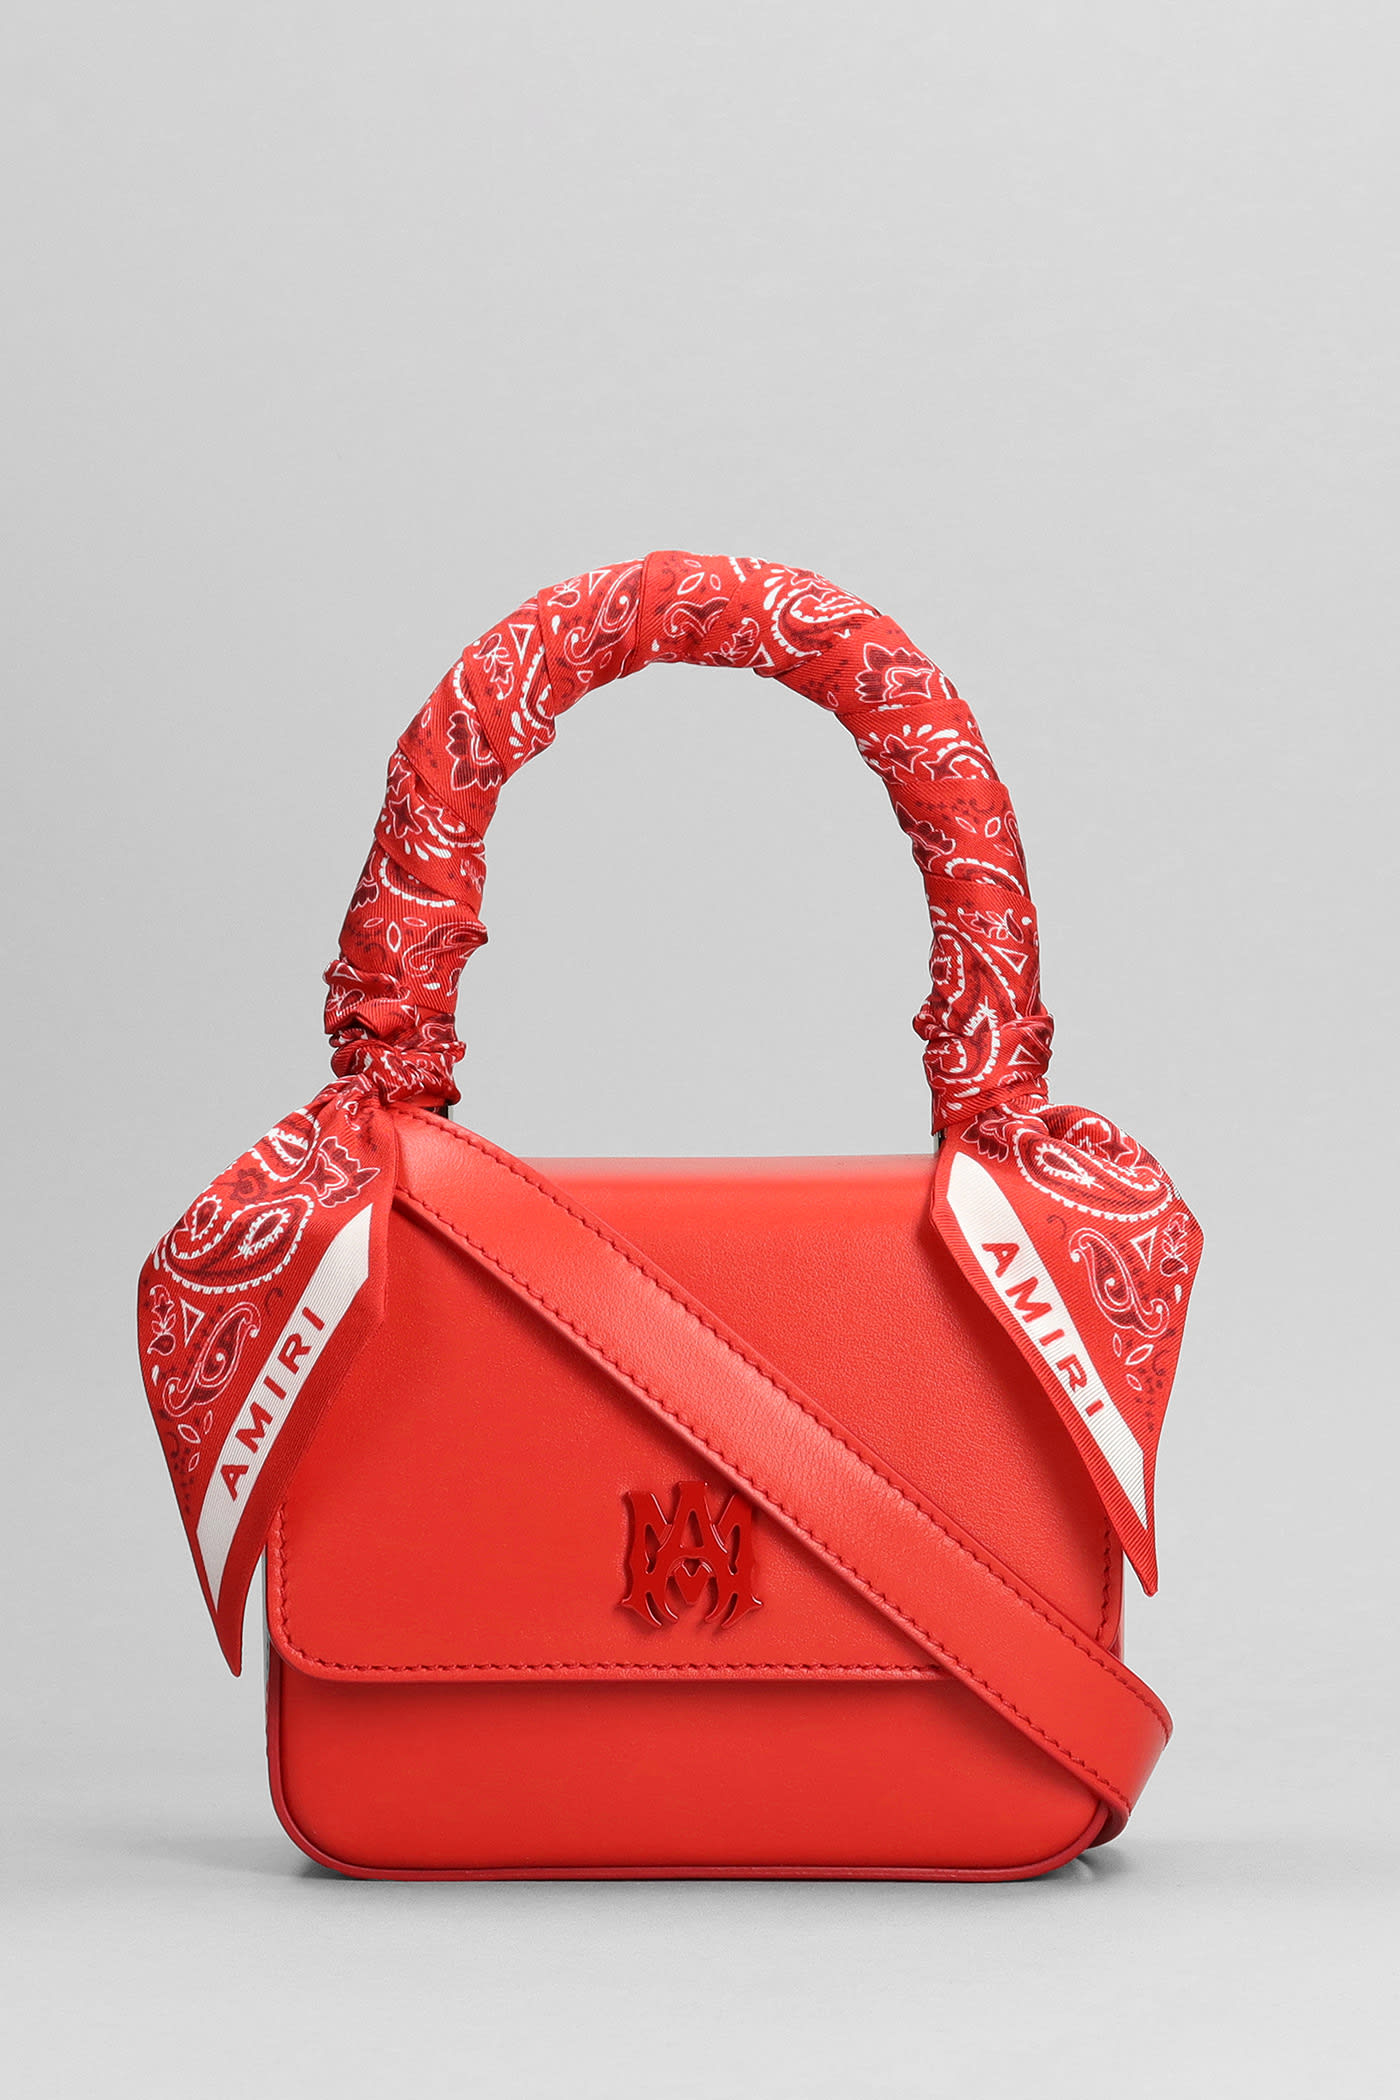 AMIRI HAND BAG IN RED LEATHER